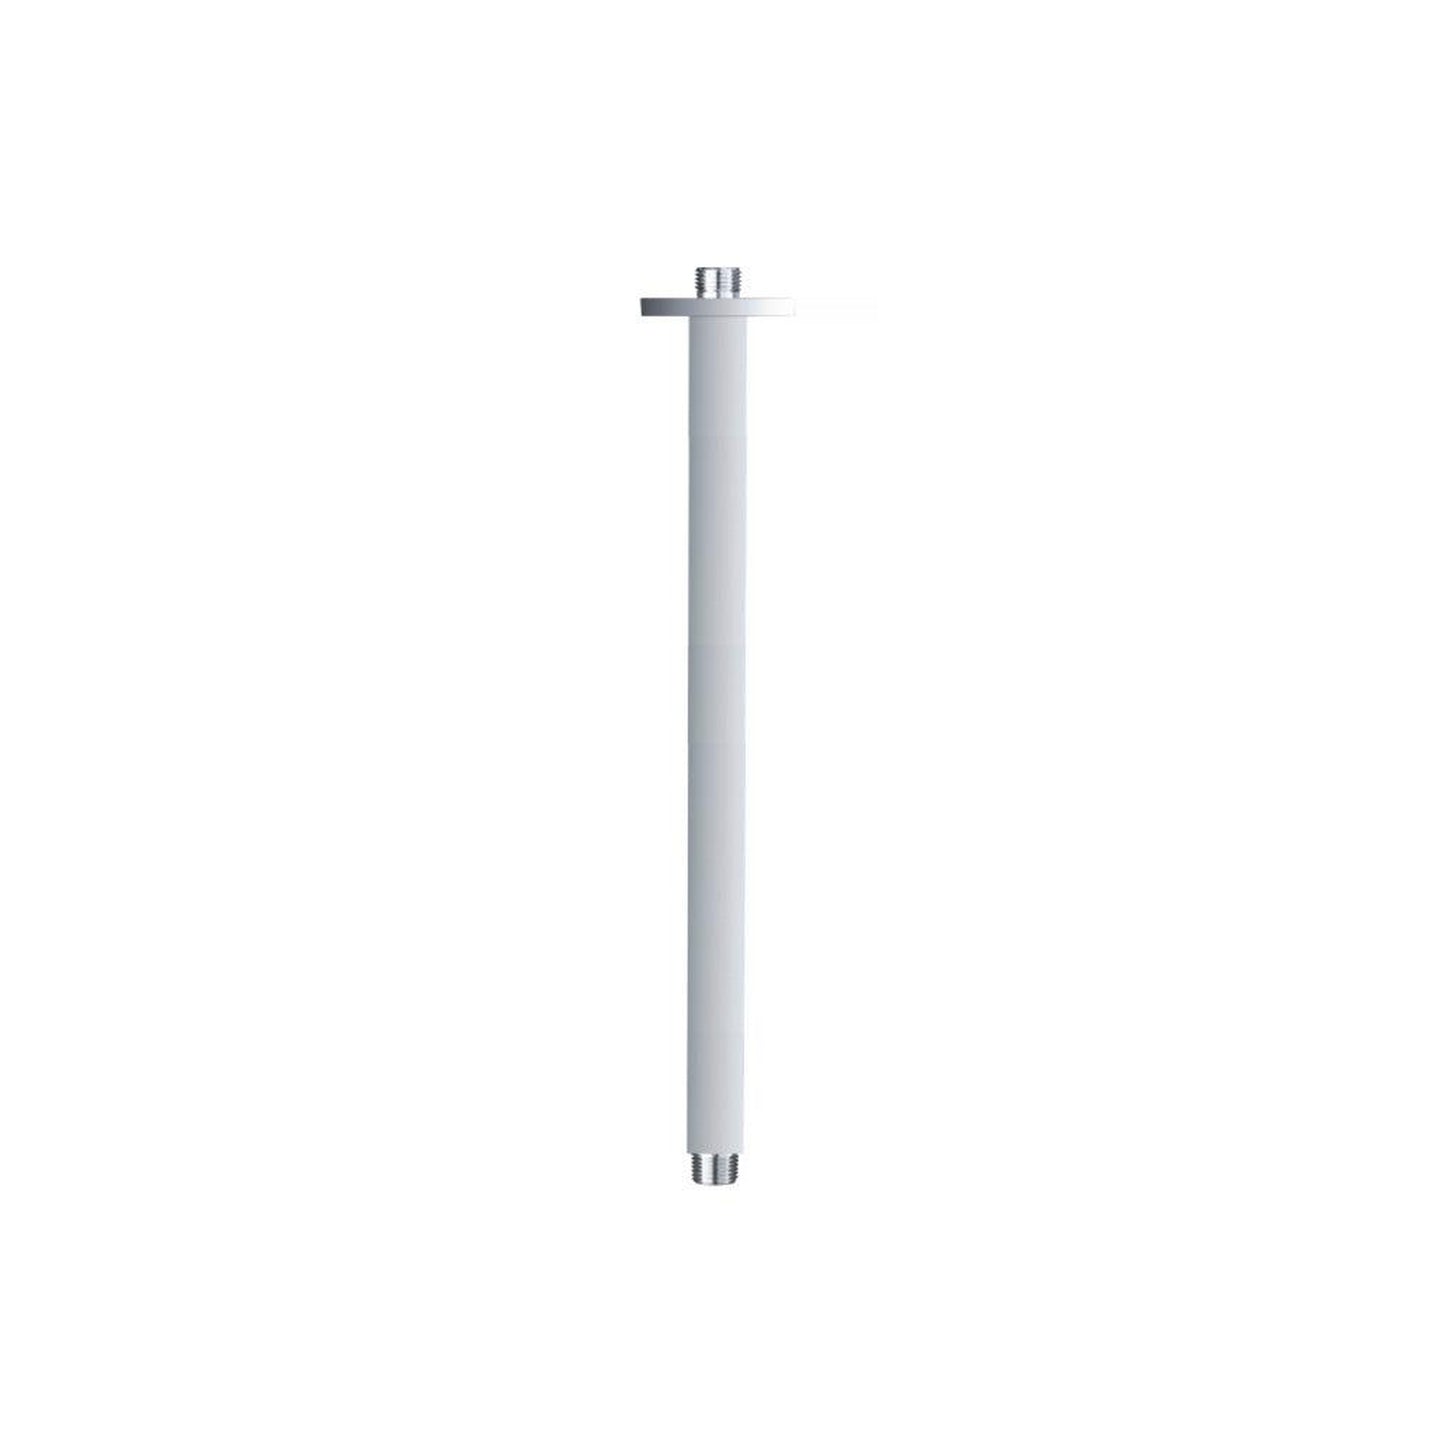 Isenberg Universal Fixtures 16" Ceiling Mount Shower Arm in Polished Nickel (160.16CSAPN)